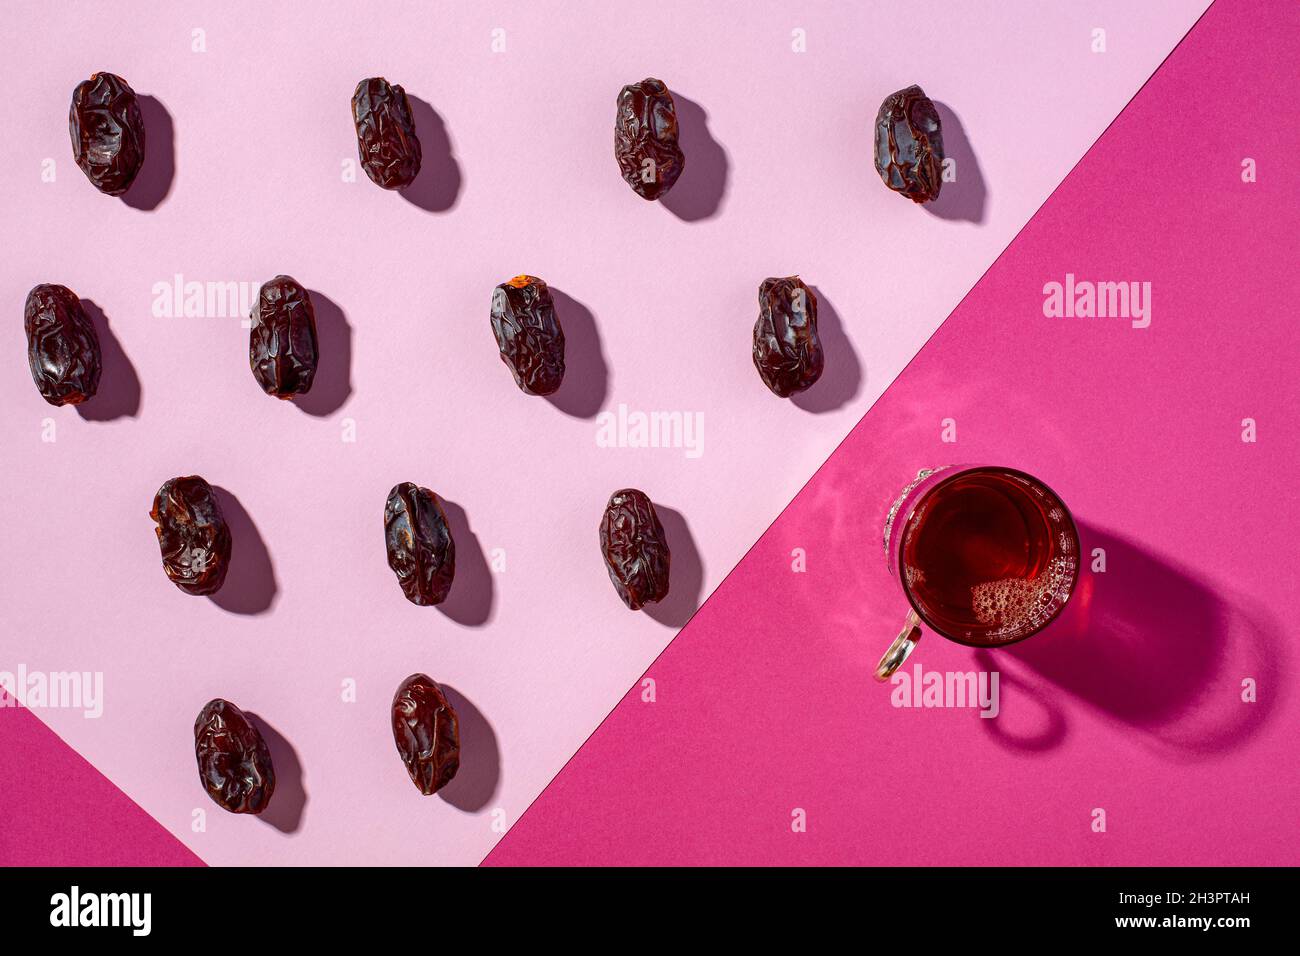 Glass of black tea and date fruit. Stock Photo